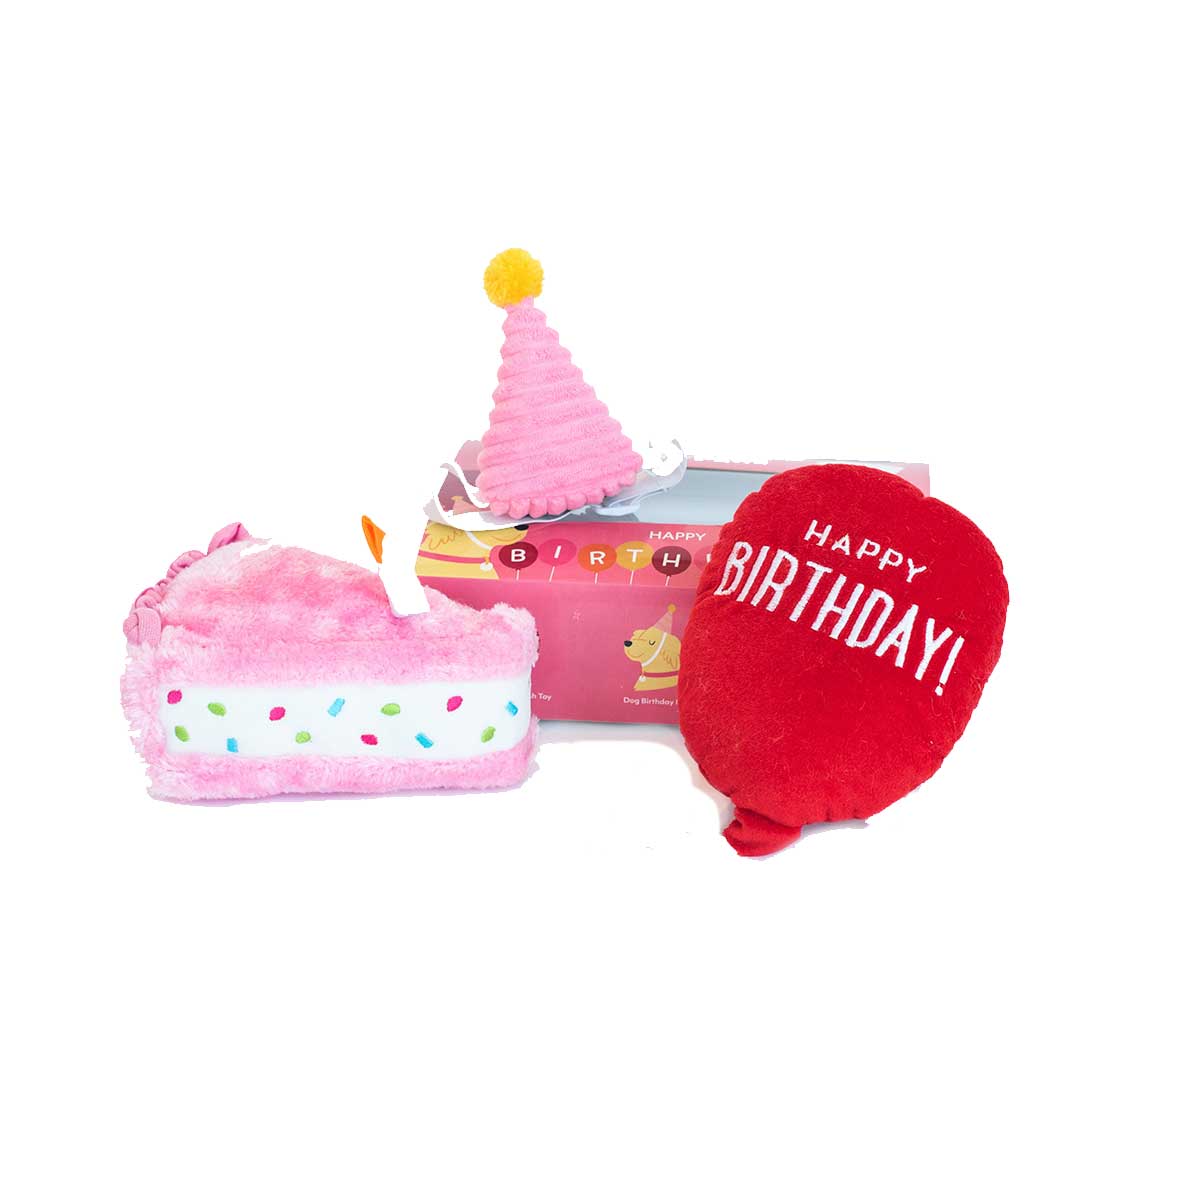 Birthday Party Box Set for Girls | Pawlicious & Company